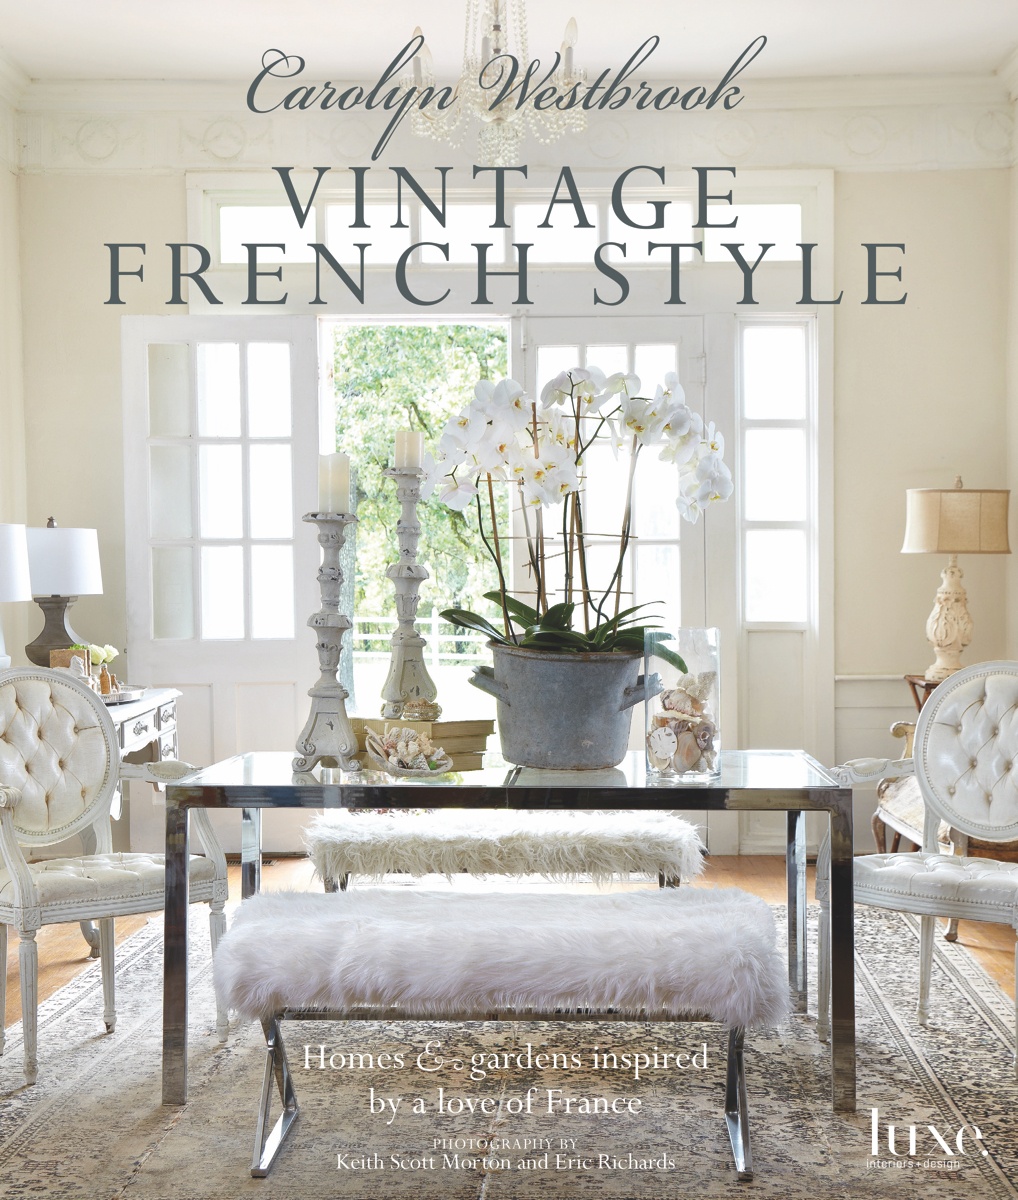 Vintage French Style design book cover by texas designer carolyn westbrook